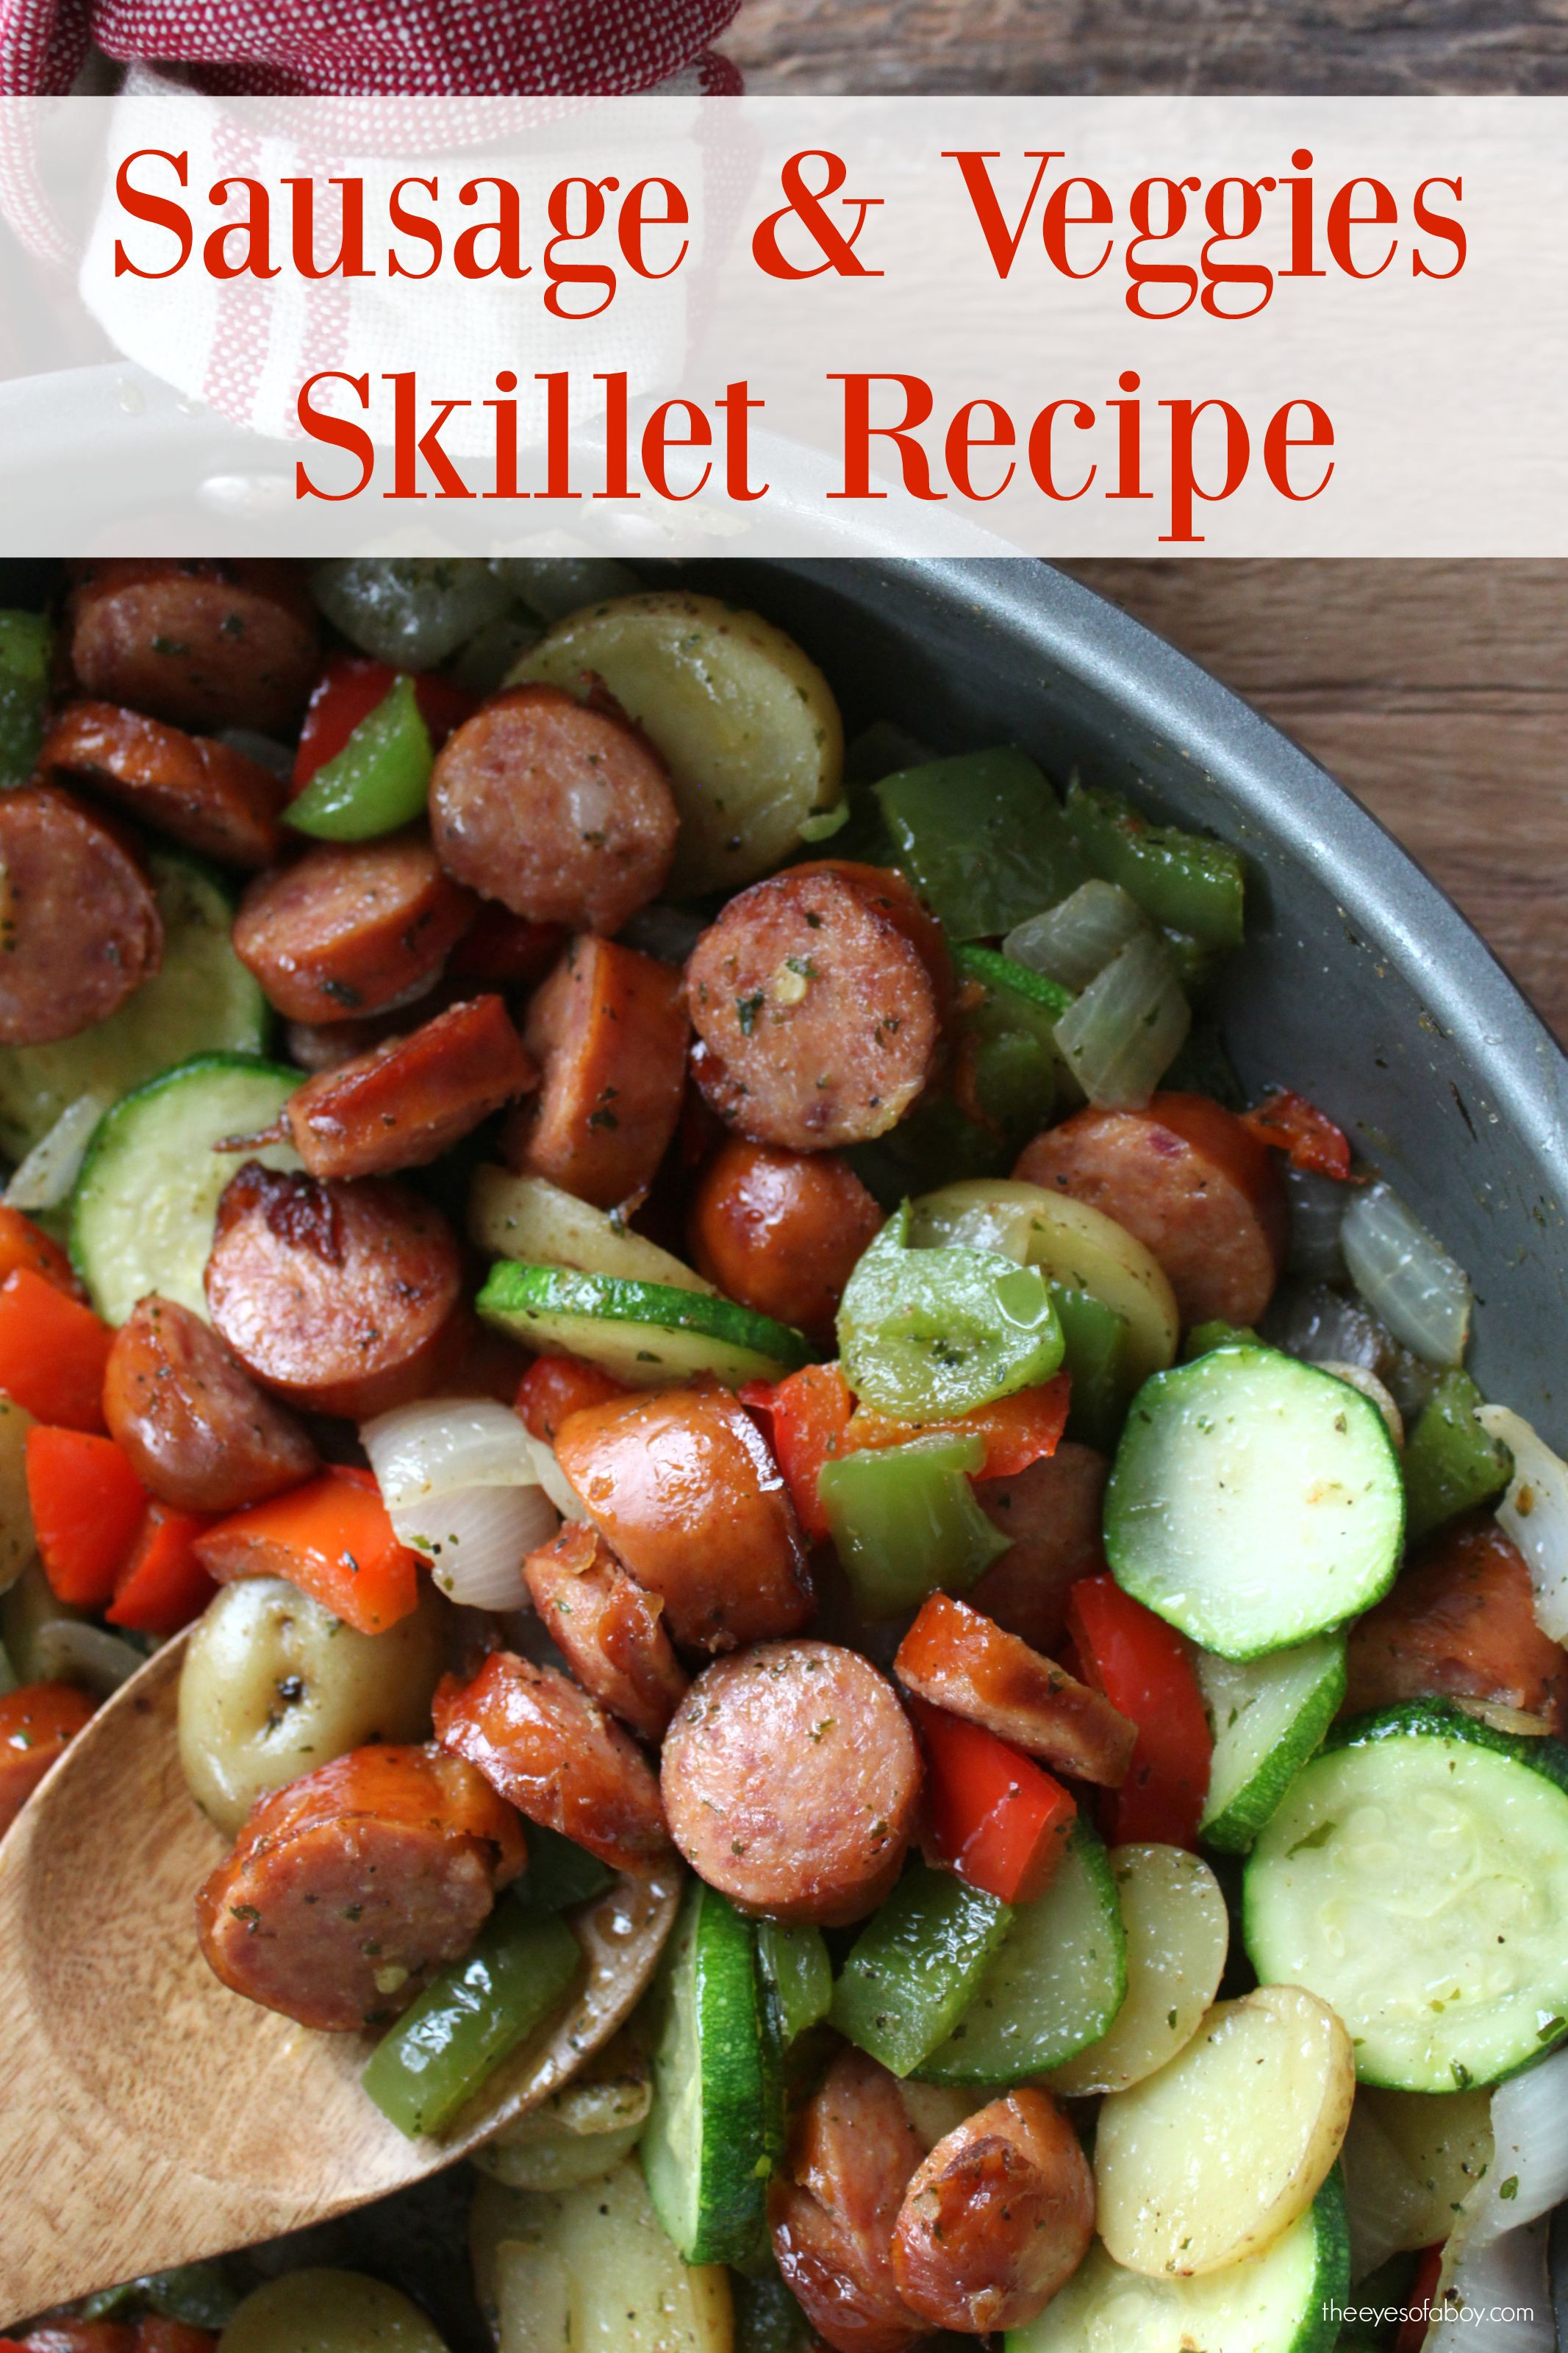 Chicken Sausage Recipes Healthy
 This quick and healthy sausage skillet meal idea is packed